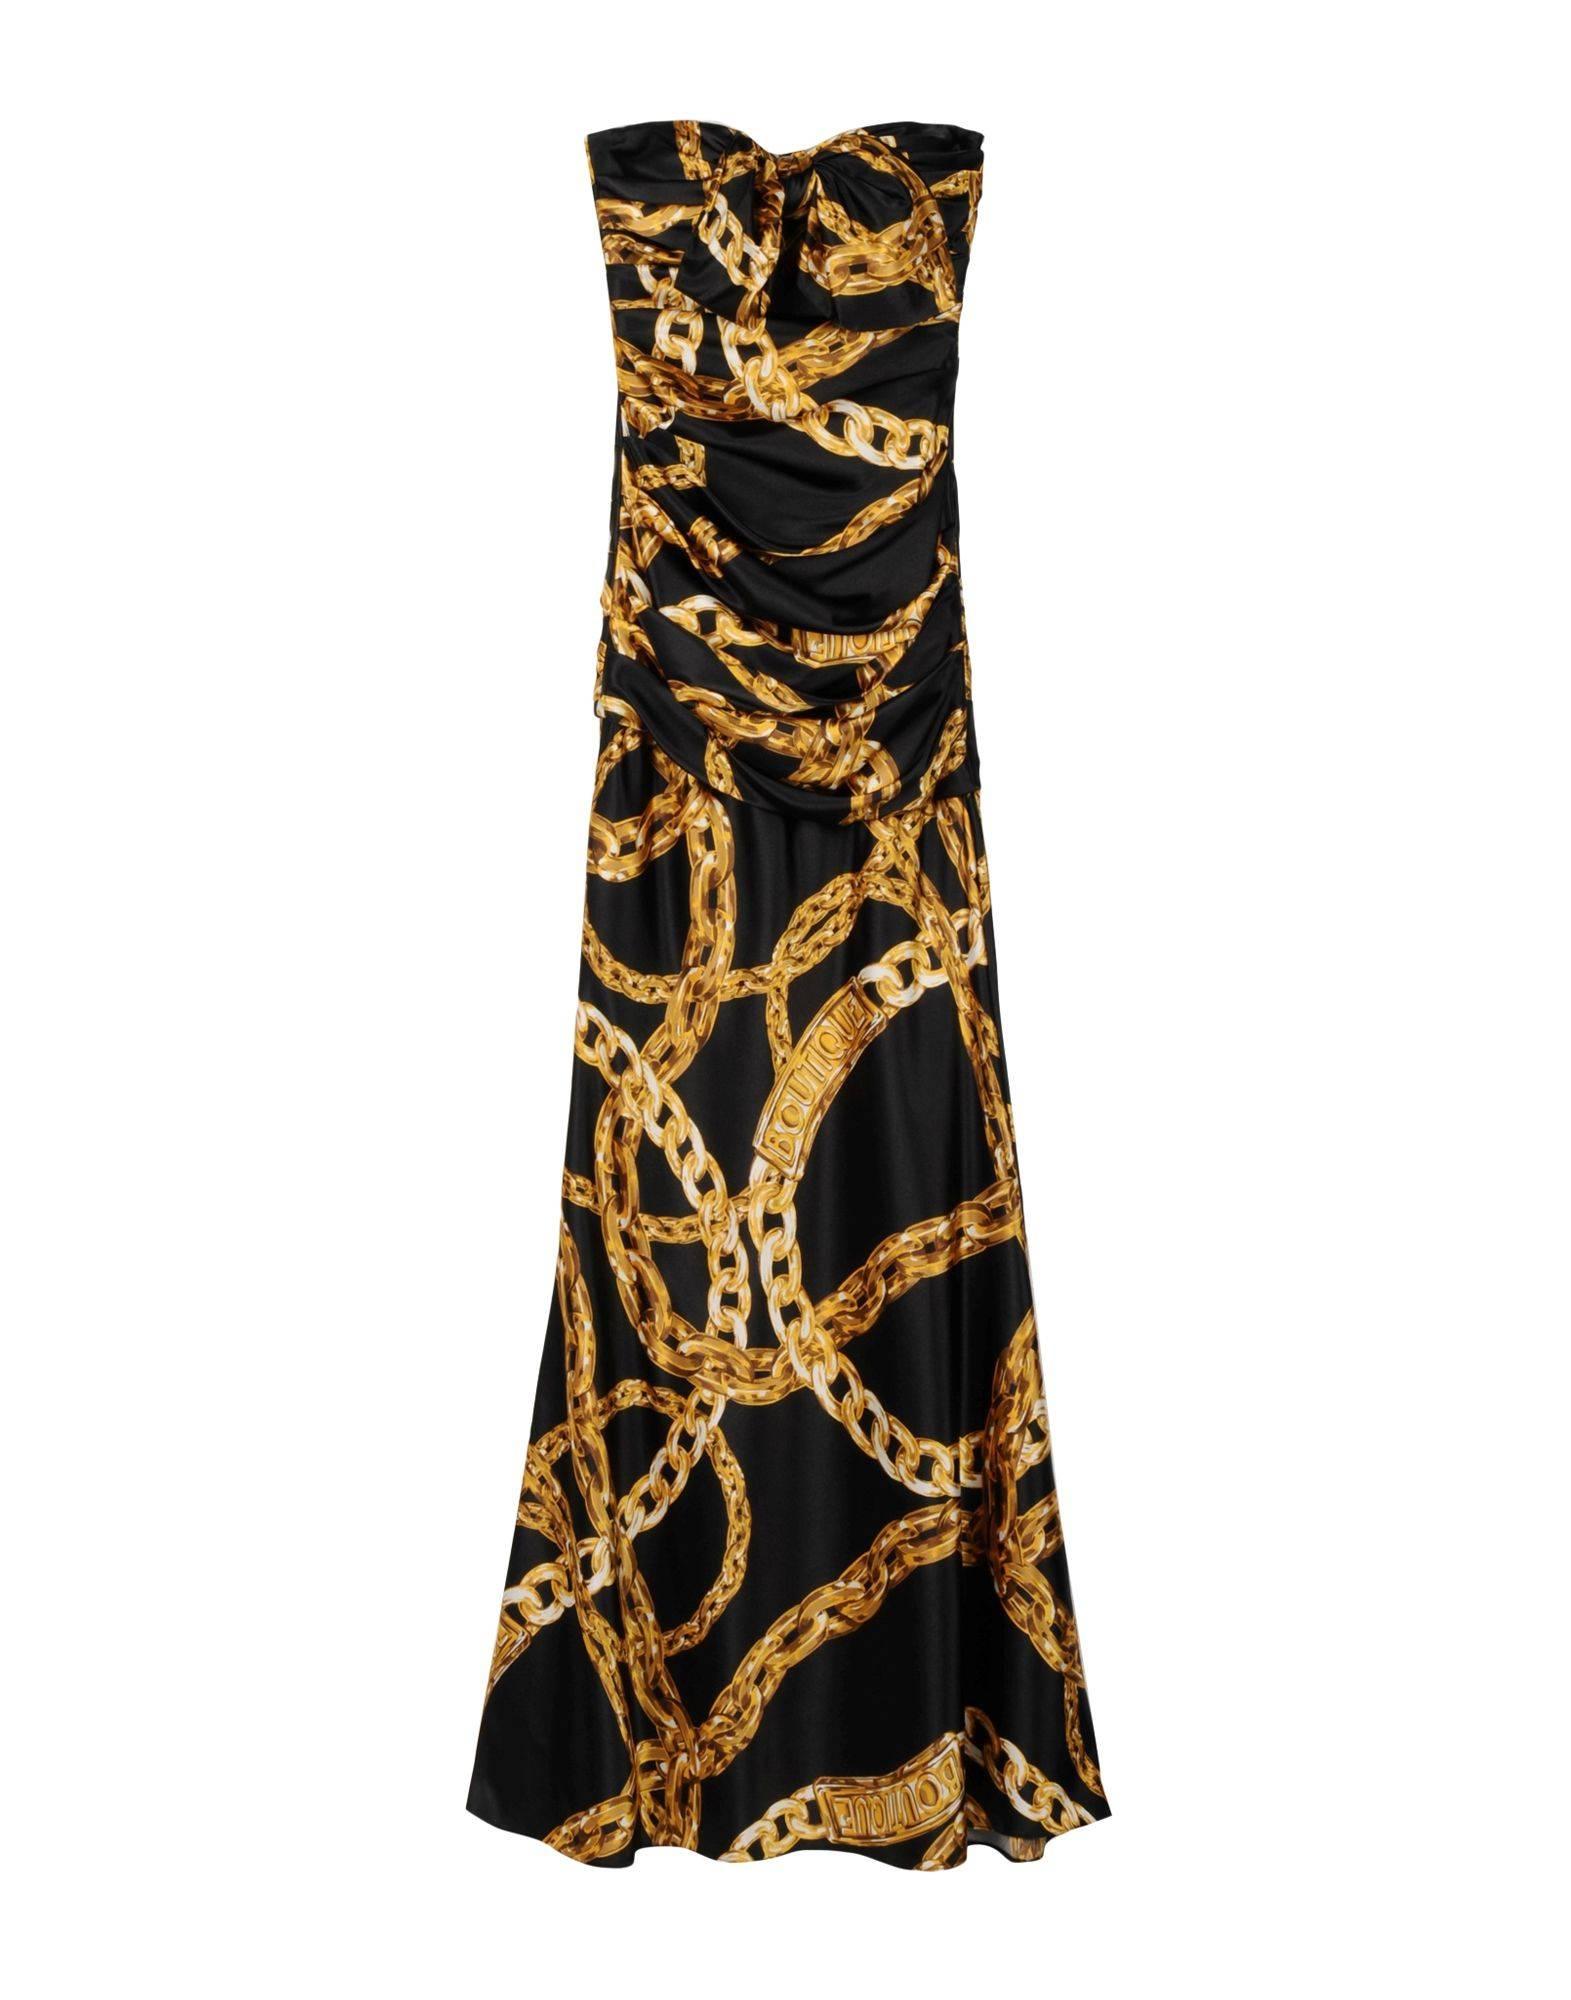 2016s Moschino Boutique sold out Long Dress Gold Chain NWOT

Model RA0411 size 40

Composition: polyestere and others